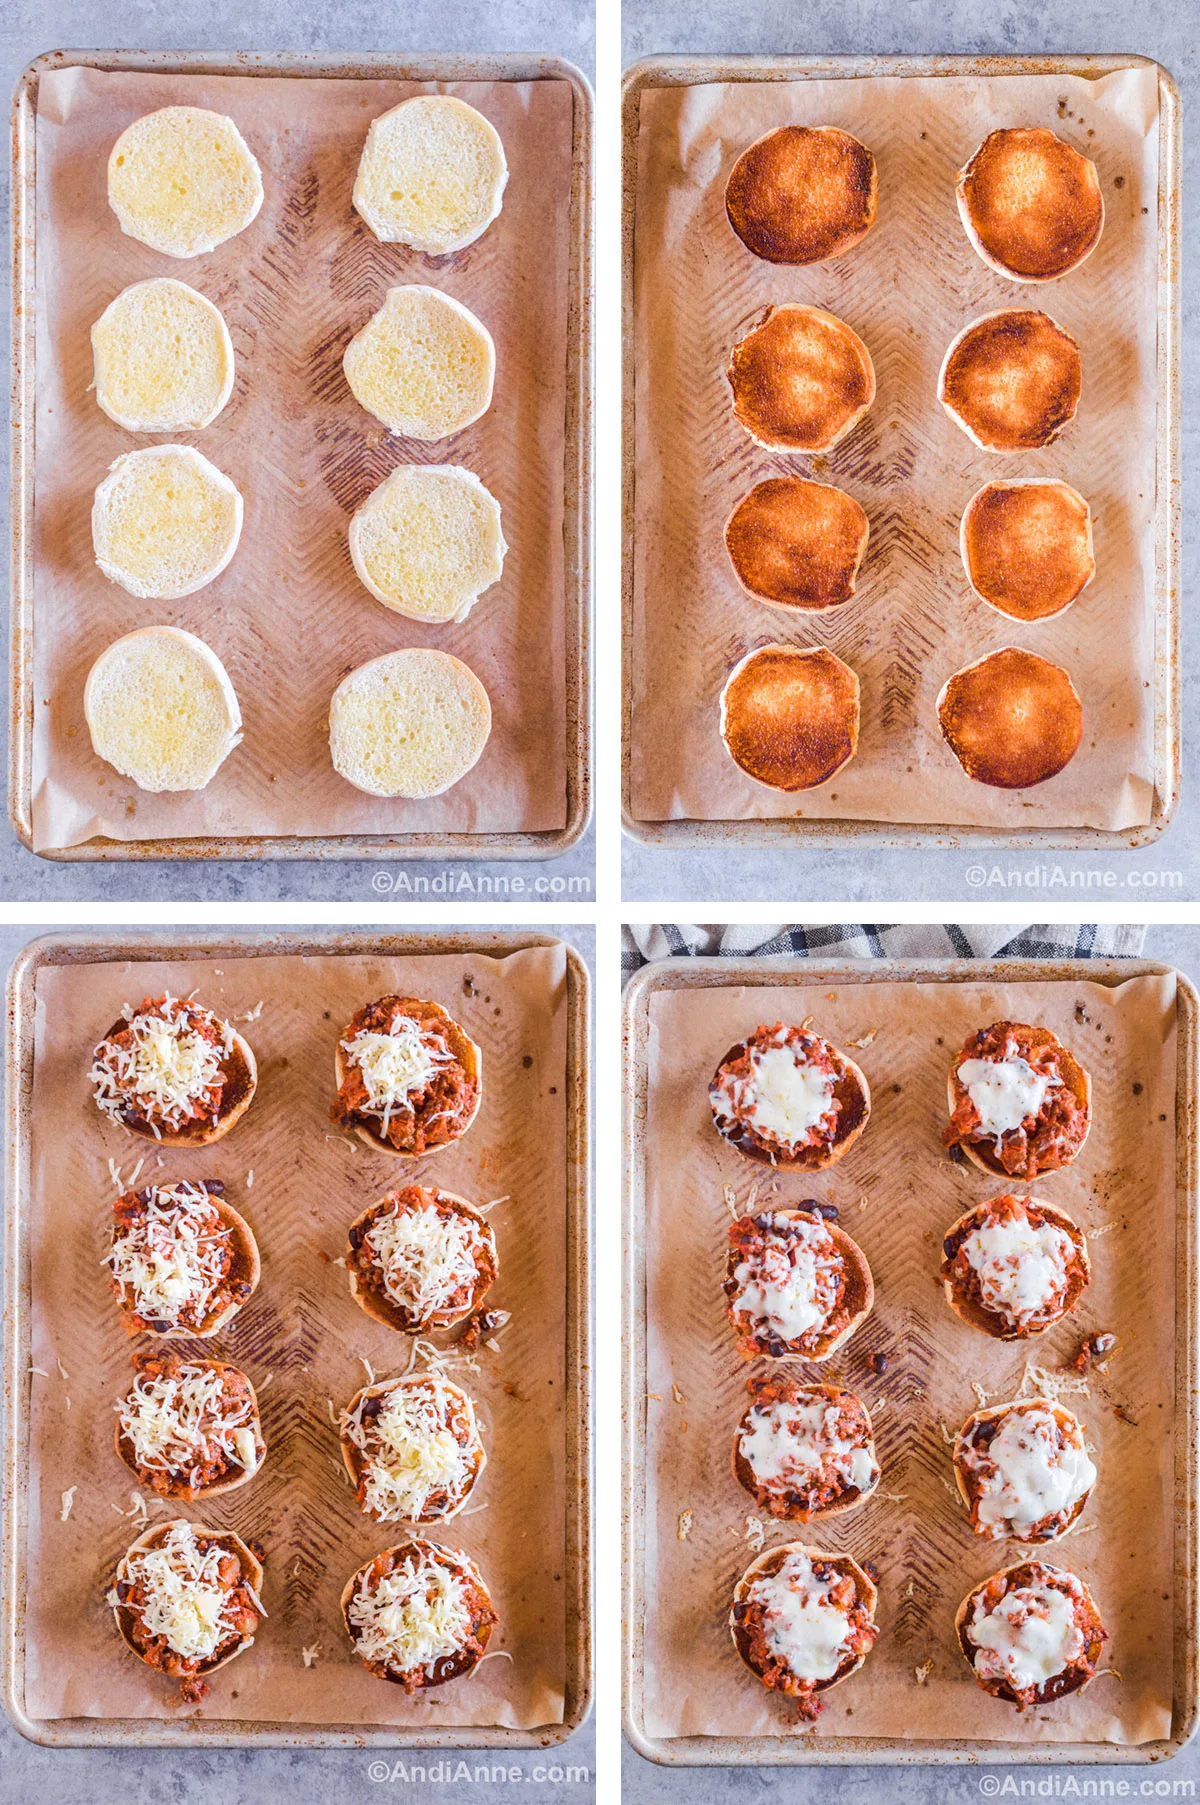 Four images together. First two are baking sheets with hamburger buns, untoasted then toasted. Last two are pizza sloppy joes with mozzarella cheese, first unmelted then melted.